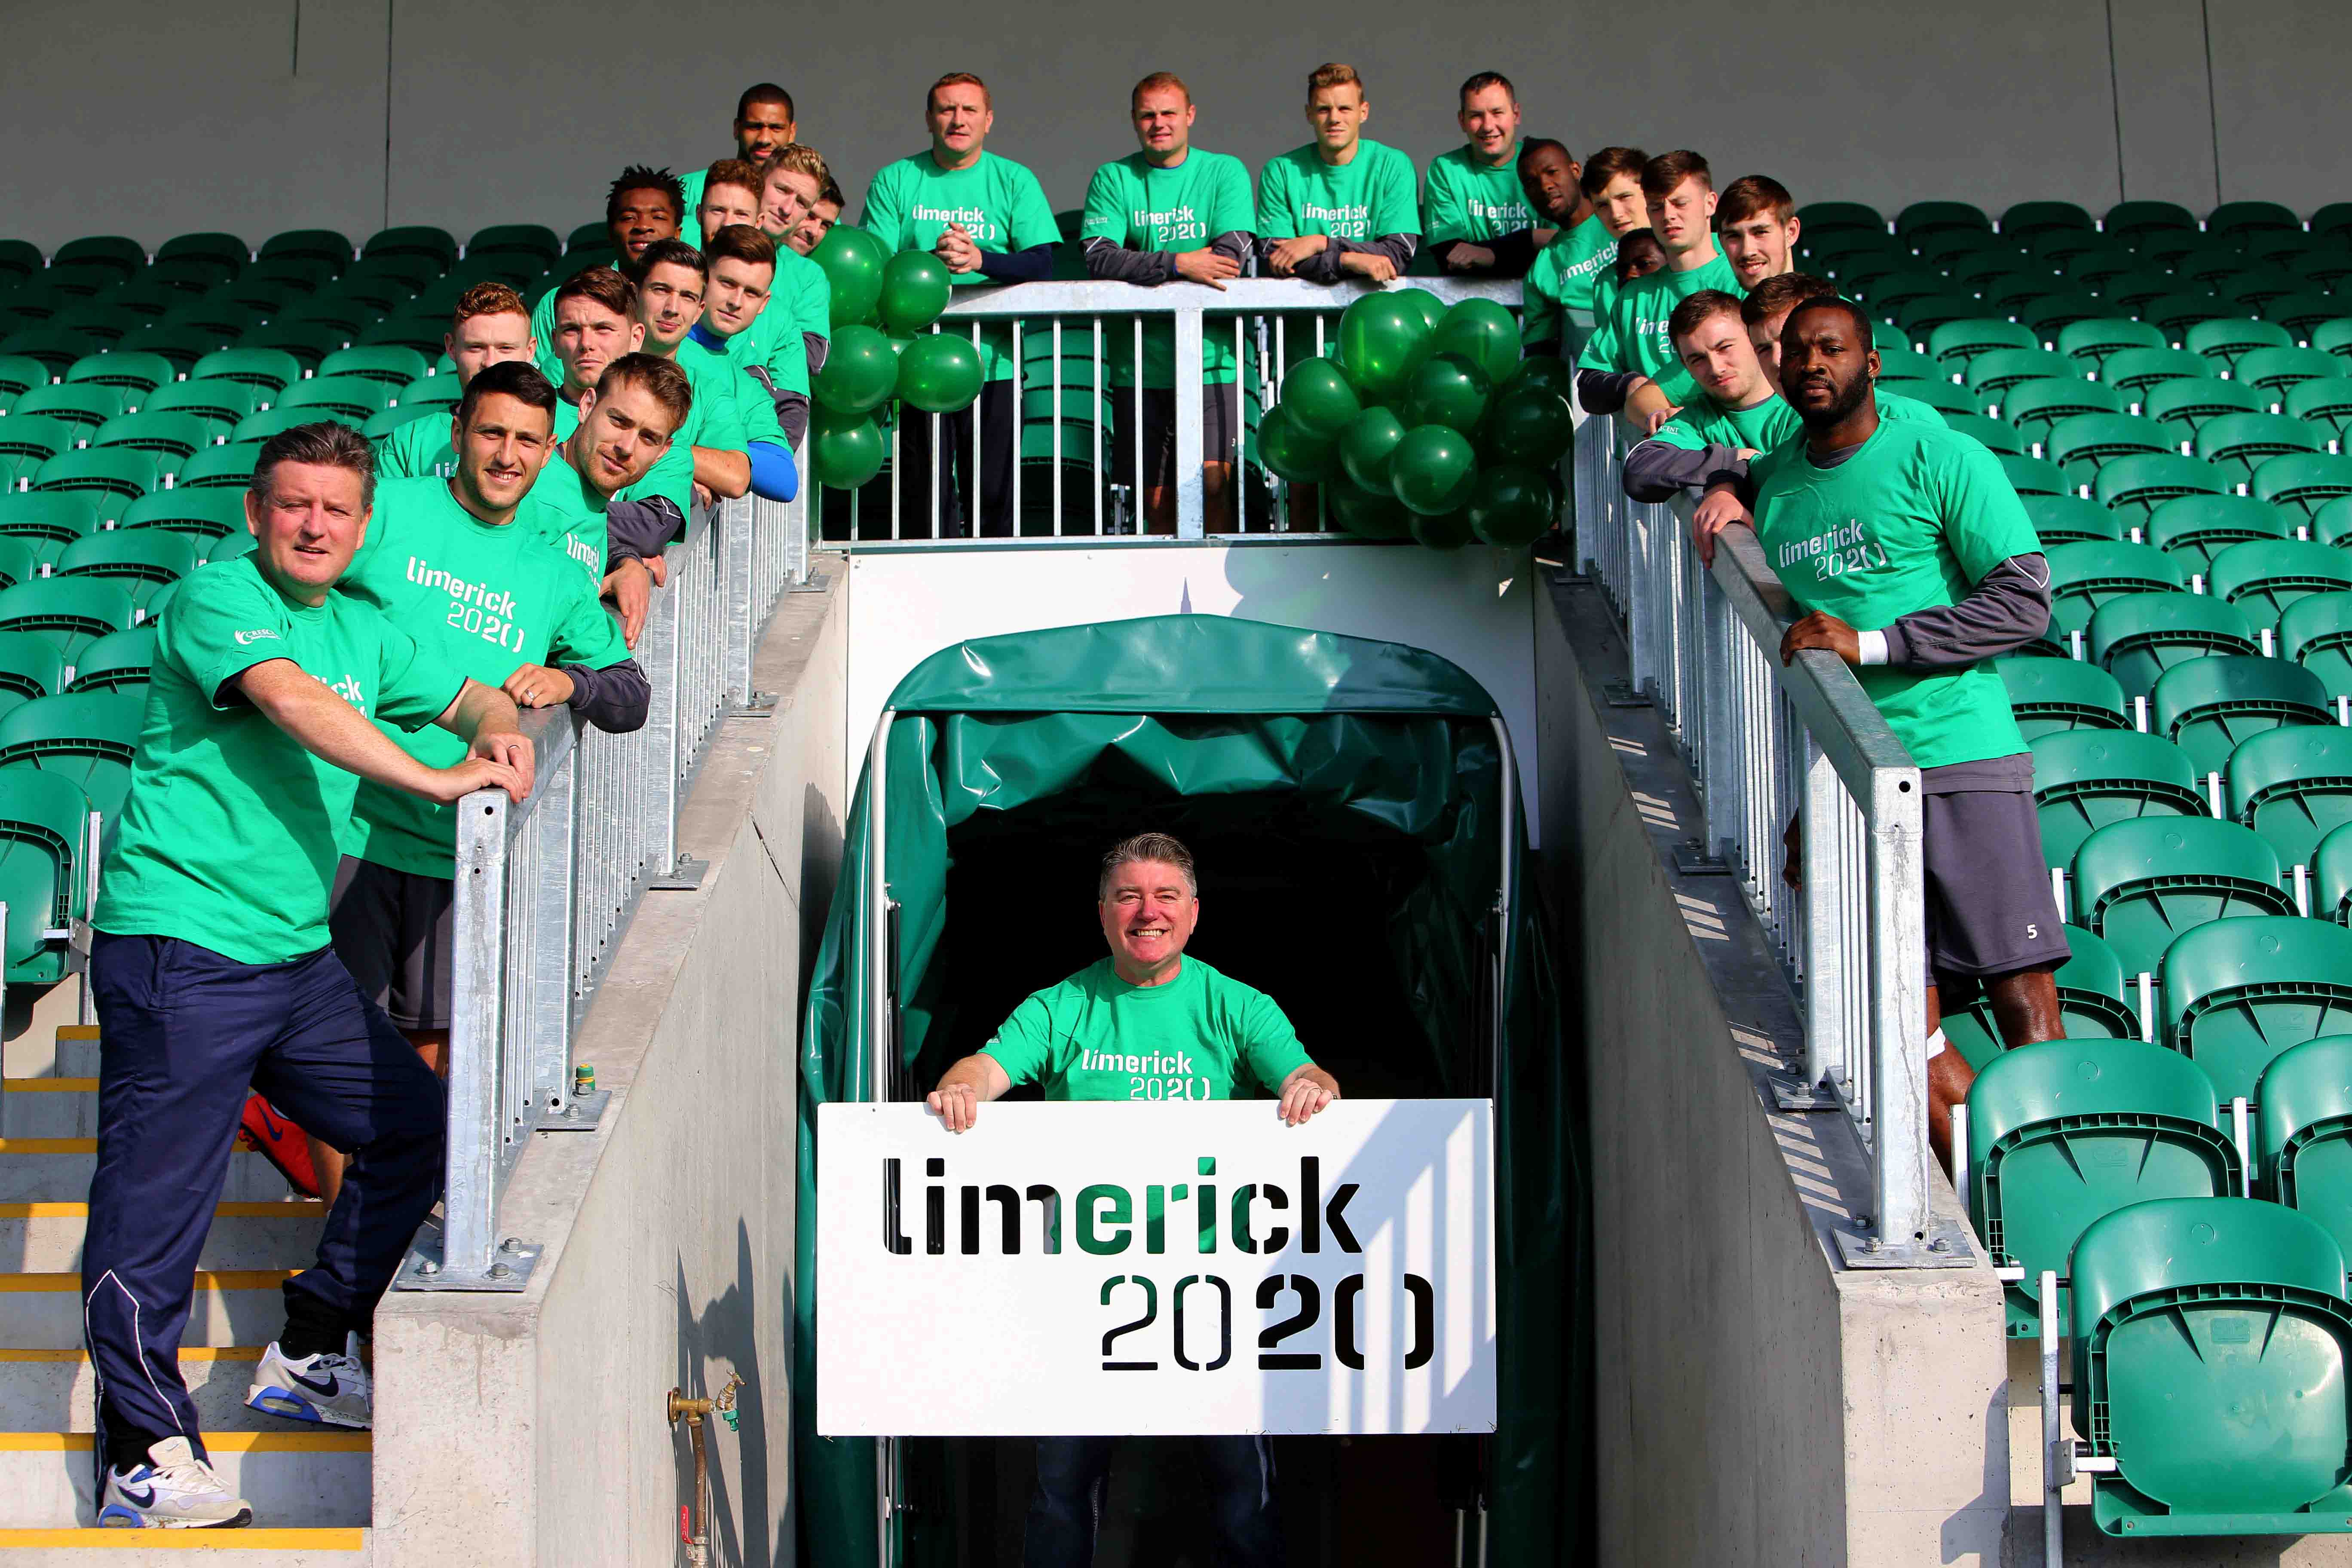 Limerick citizens announce their support for Limerick 2020